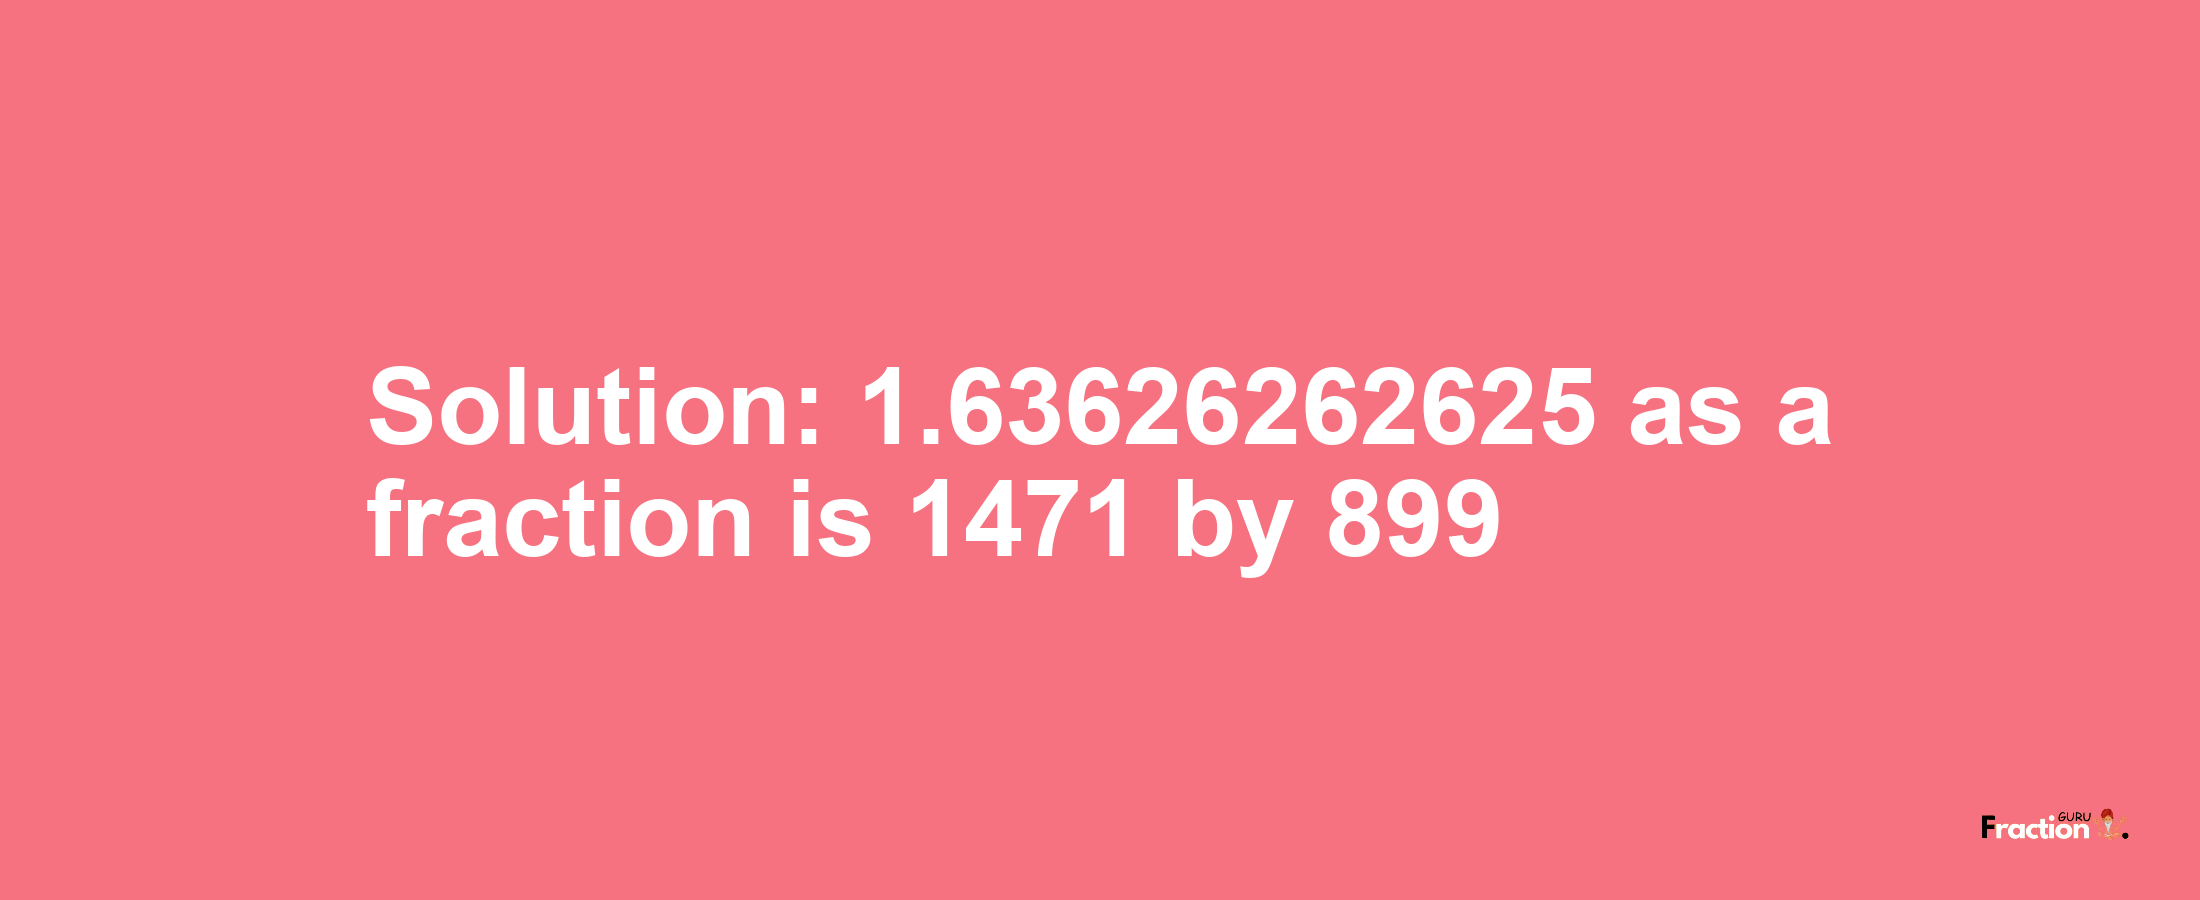 Solution:1.63626262625 as a fraction is 1471/899